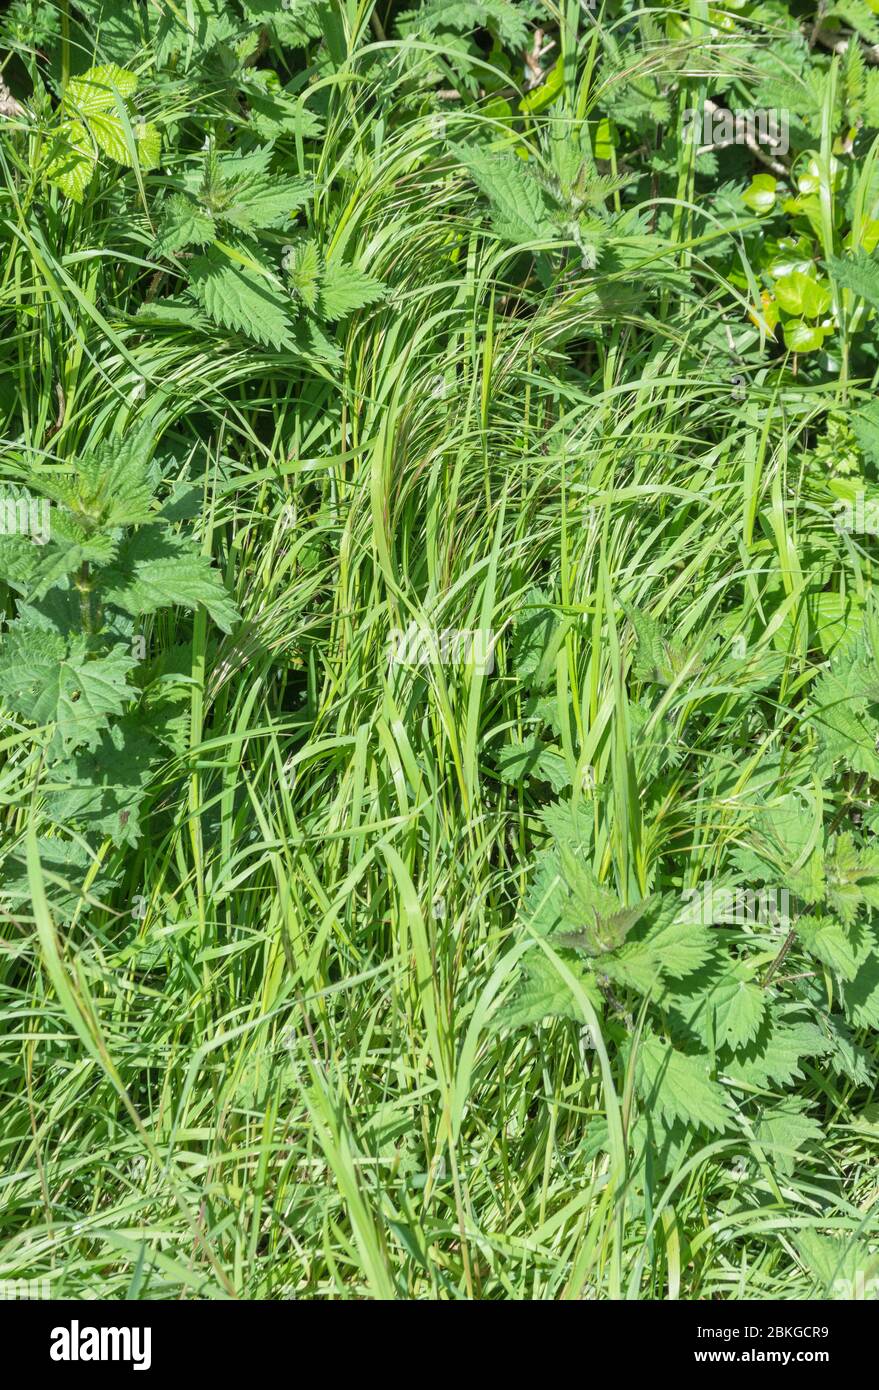 Luscious tall green grasses and weeds alongside a sleepy country road. Green long grass, long grass texture. Metaphor kicked into the long grass. Stock Photo